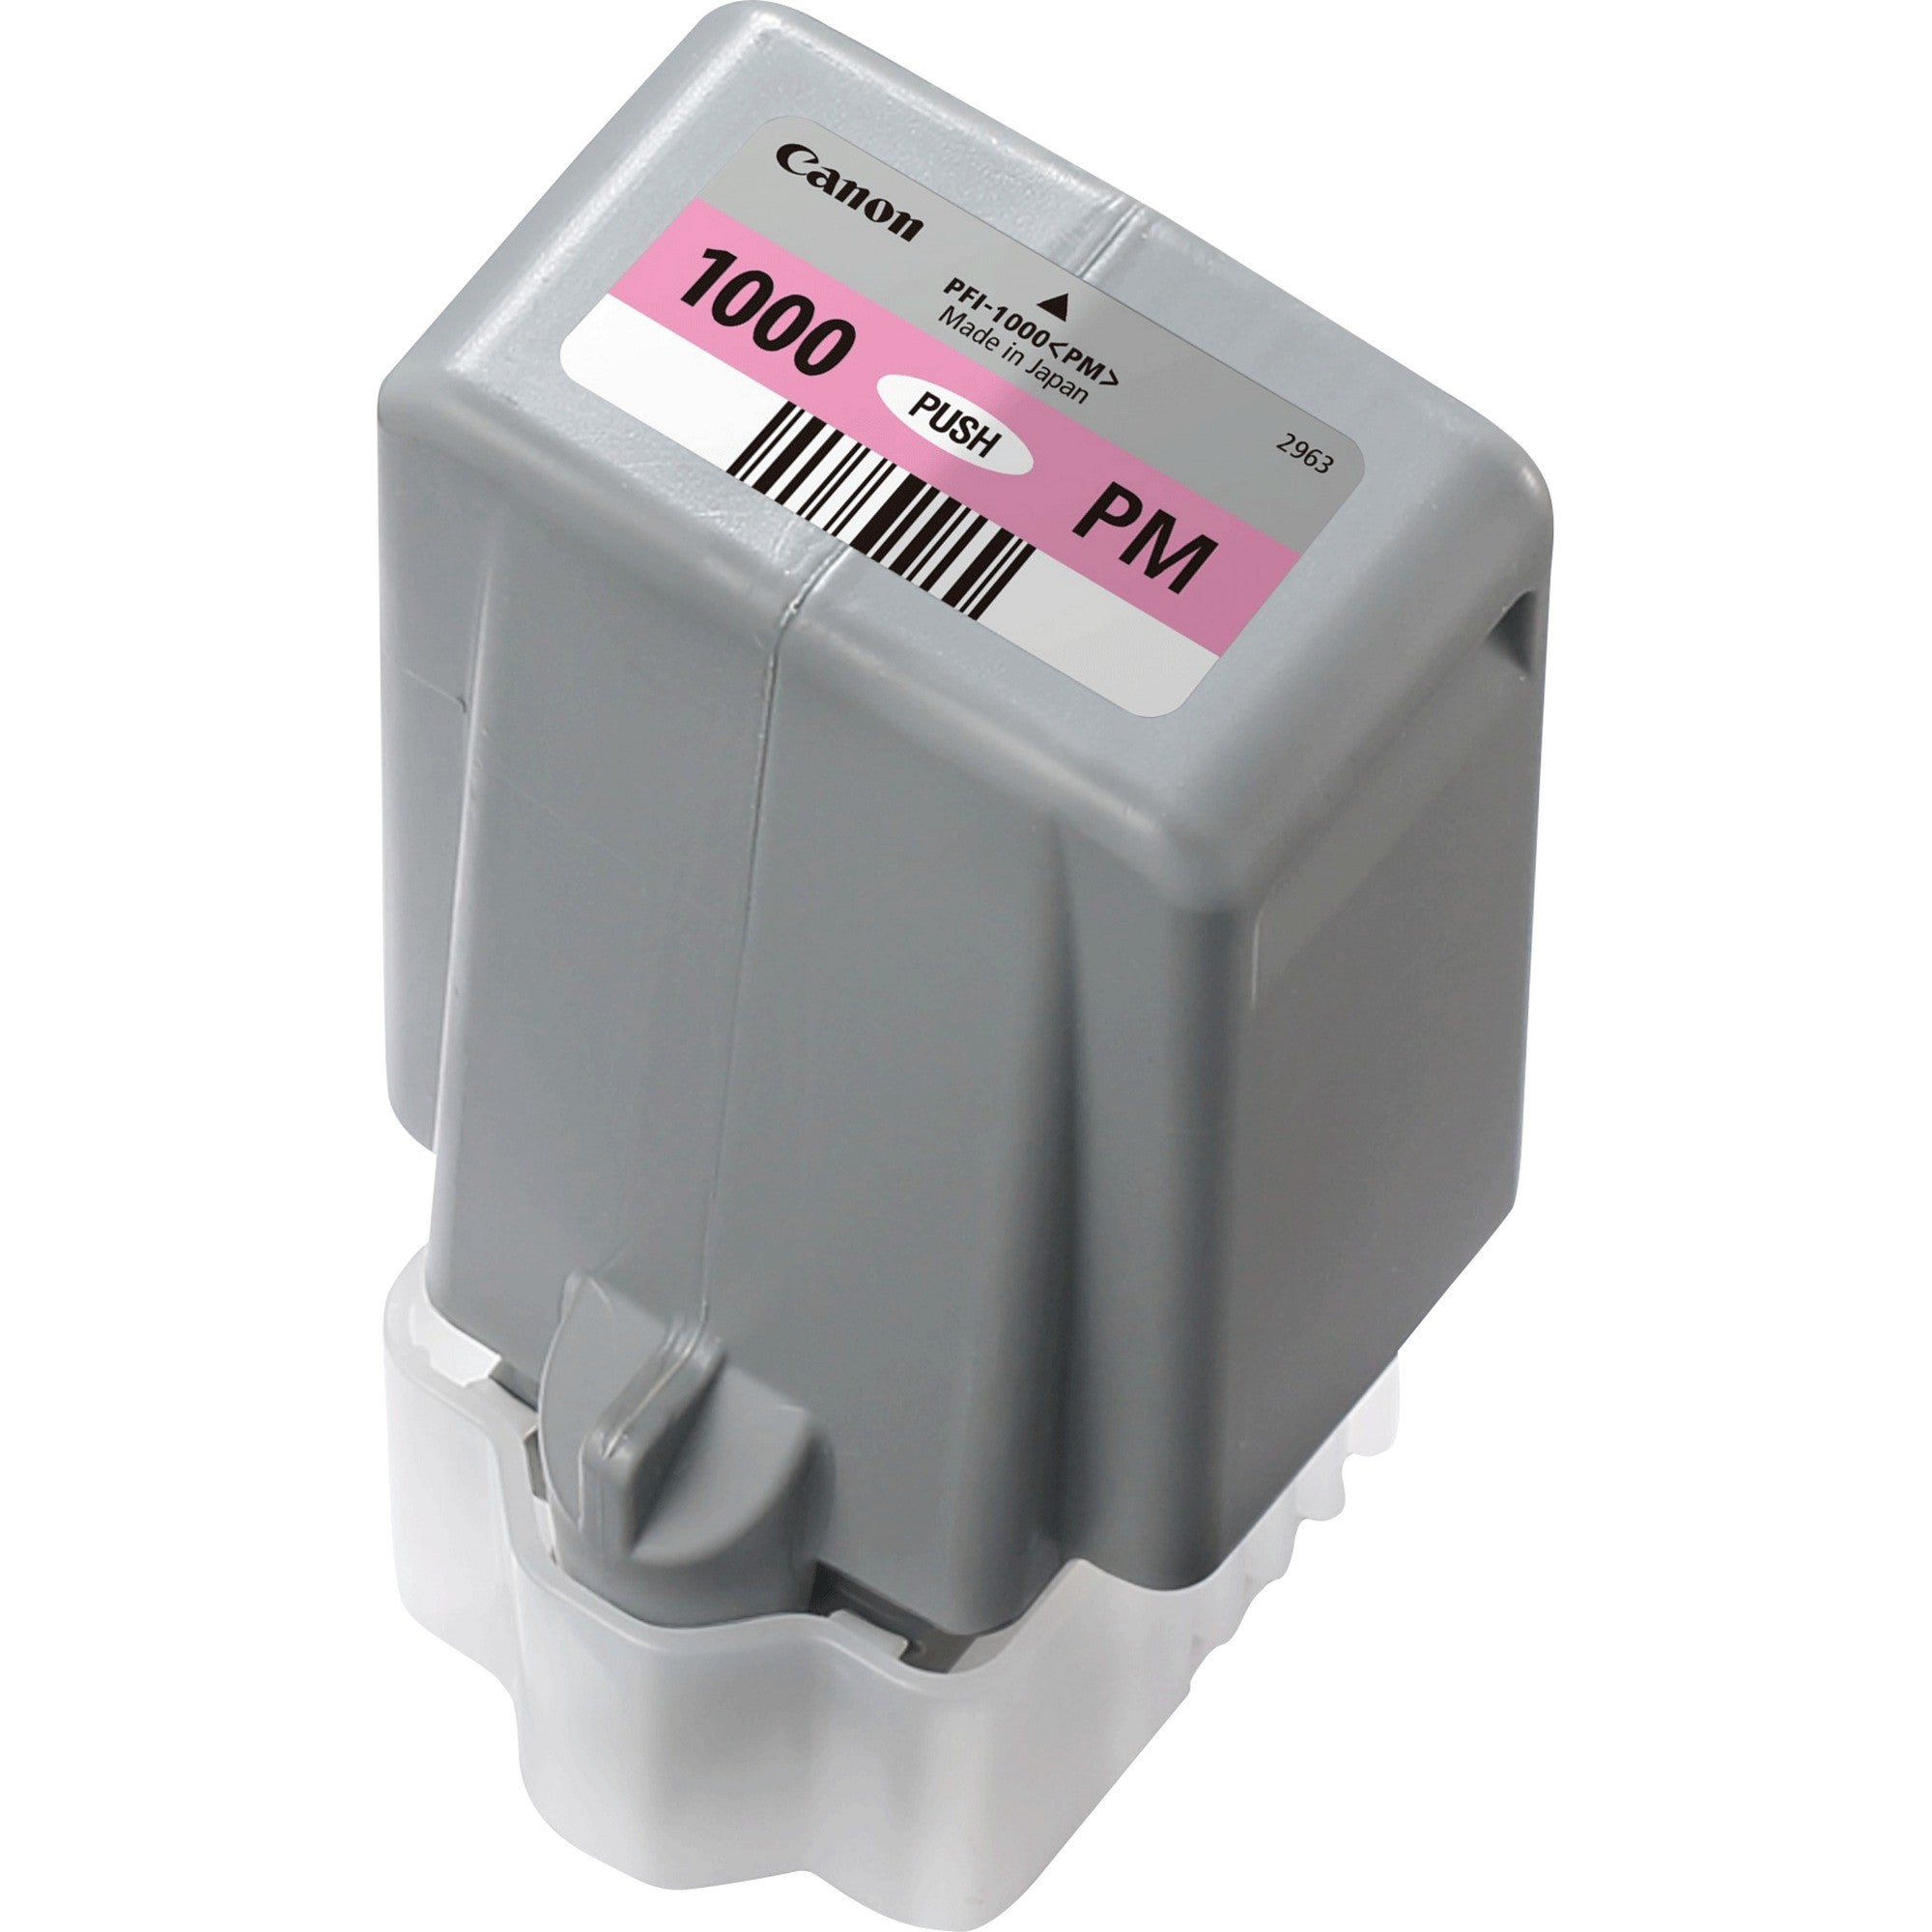 Canon 0551C001/PFI-1000PM Ink cartridge light magenta, 3.76K pages 80ml for Canon Pro 1000